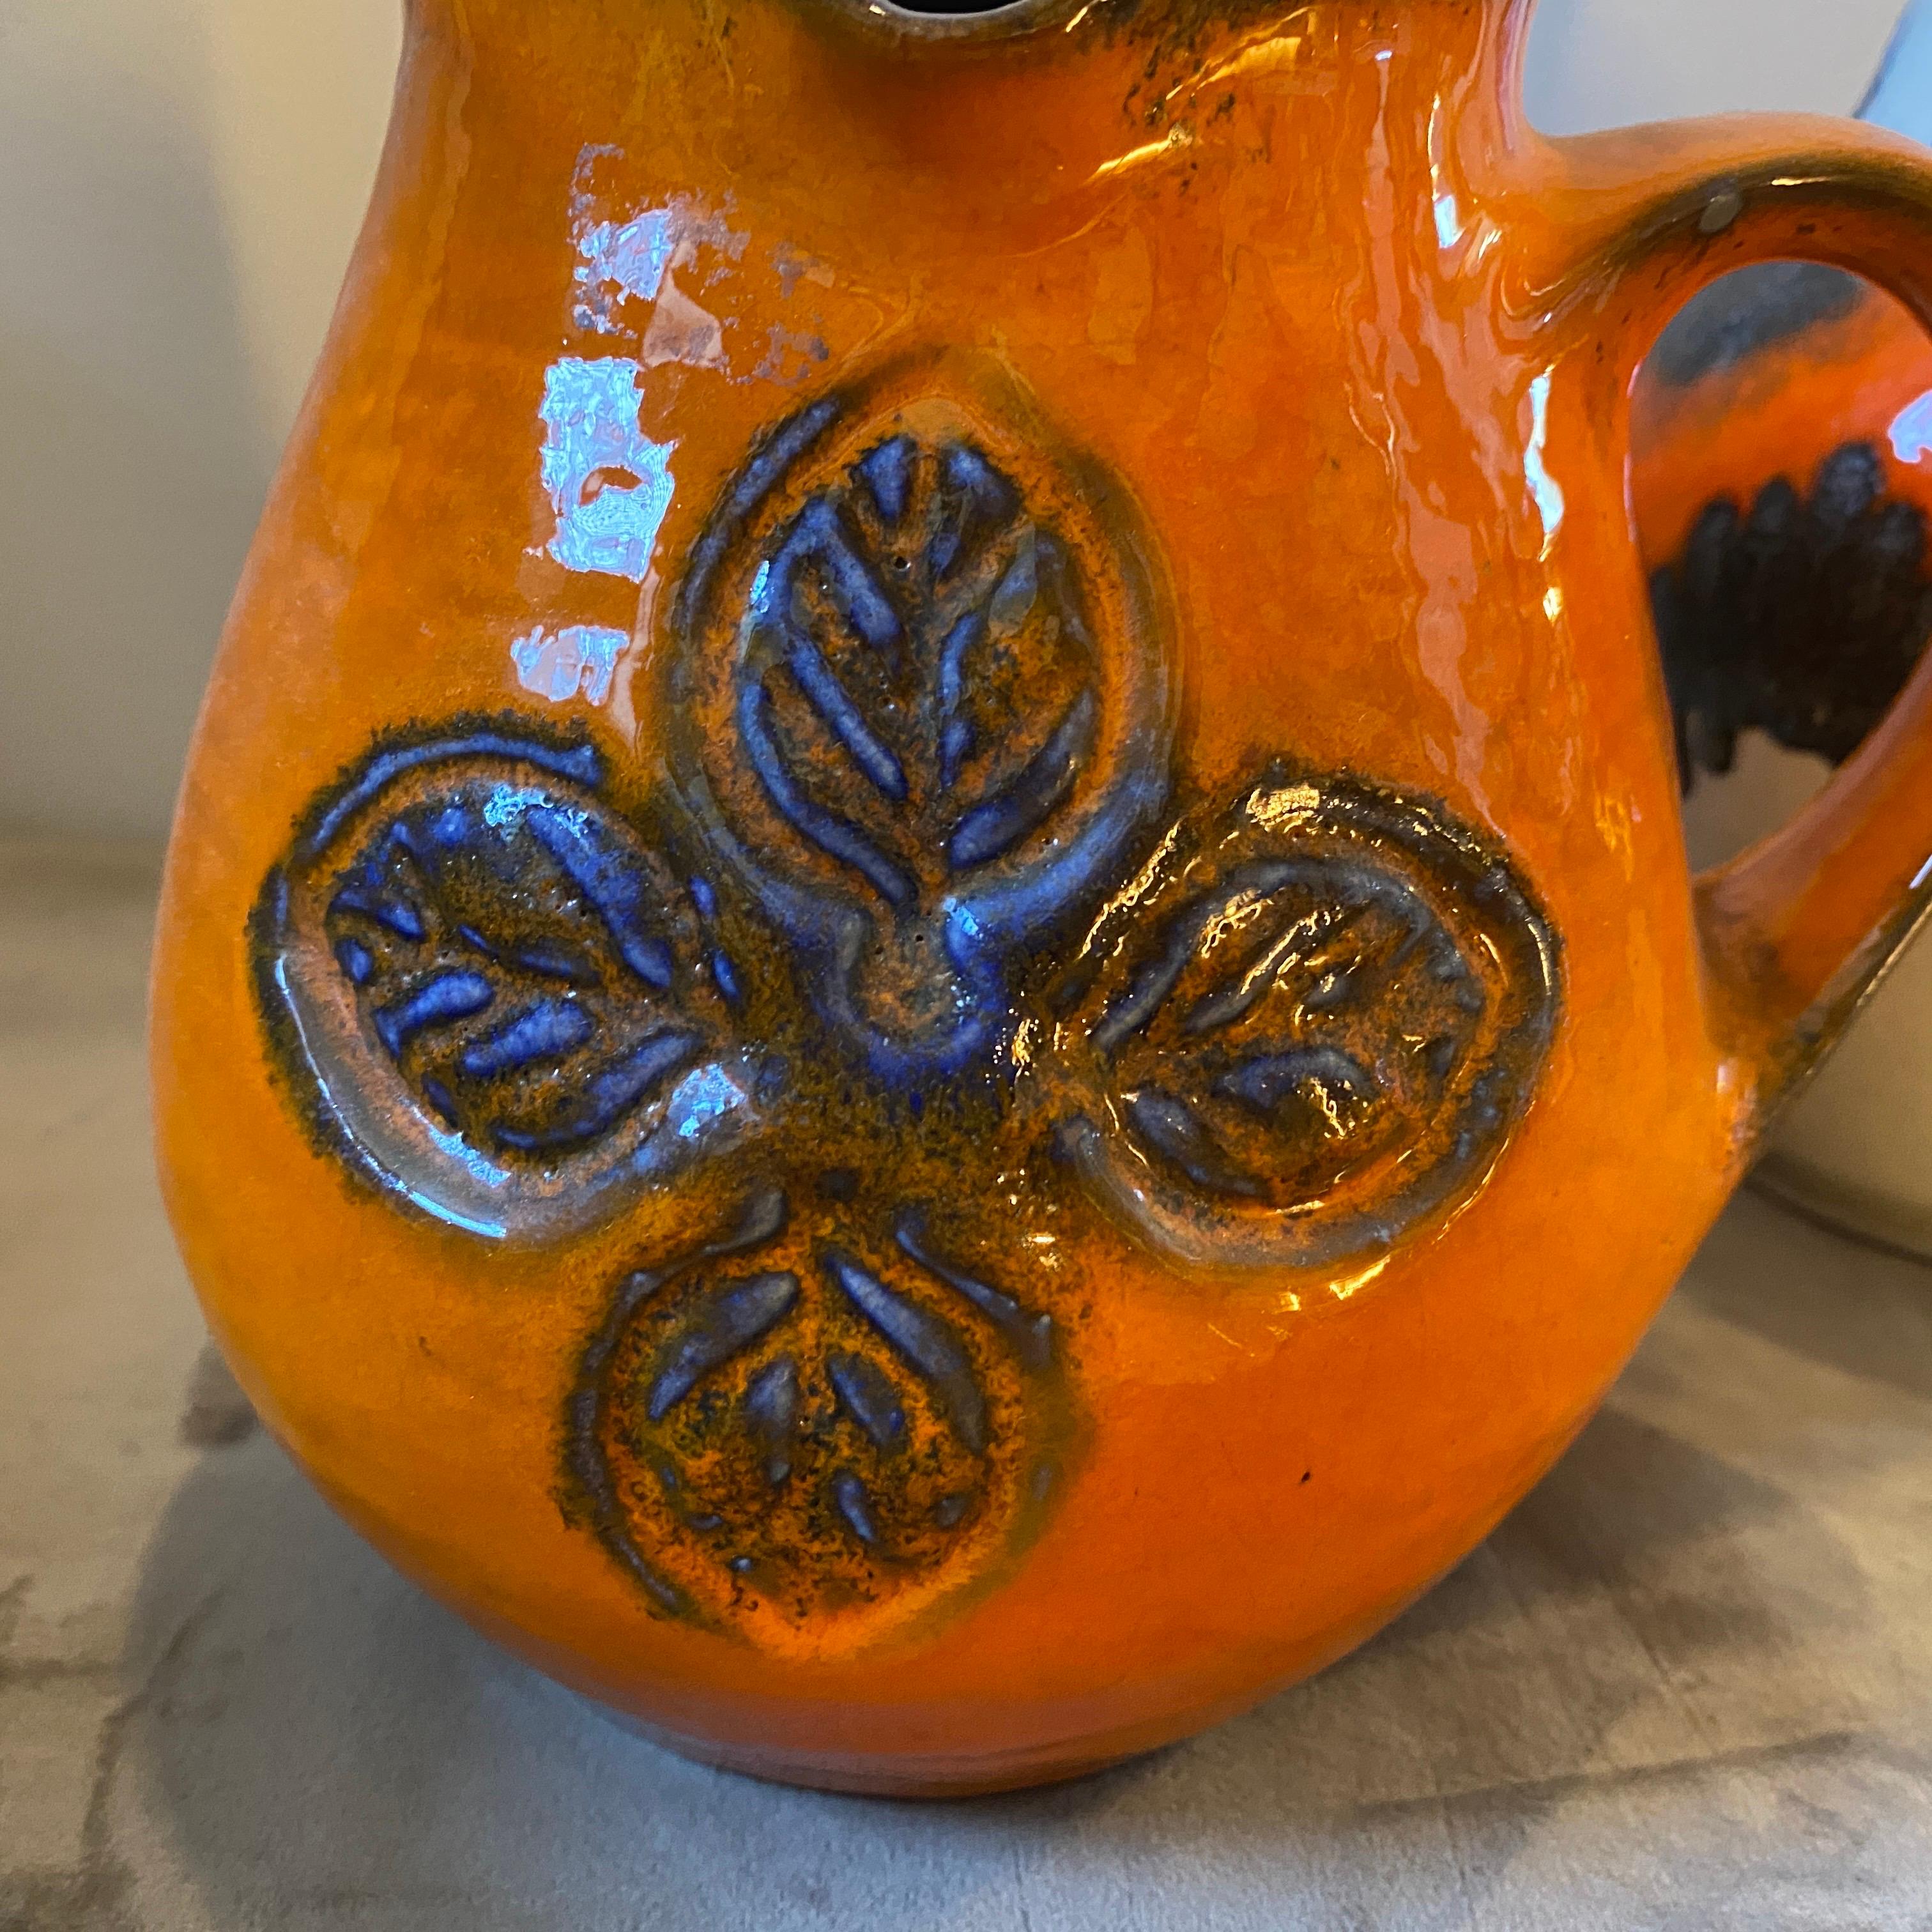 Two fat lava ceramic jug hand-crafted in Germany in the seventies. They are in lovely conditions, height dimension of the small one is cm 17. The orange color is an iconic color of the fat lava ceramic production. These German Jugs are iconic